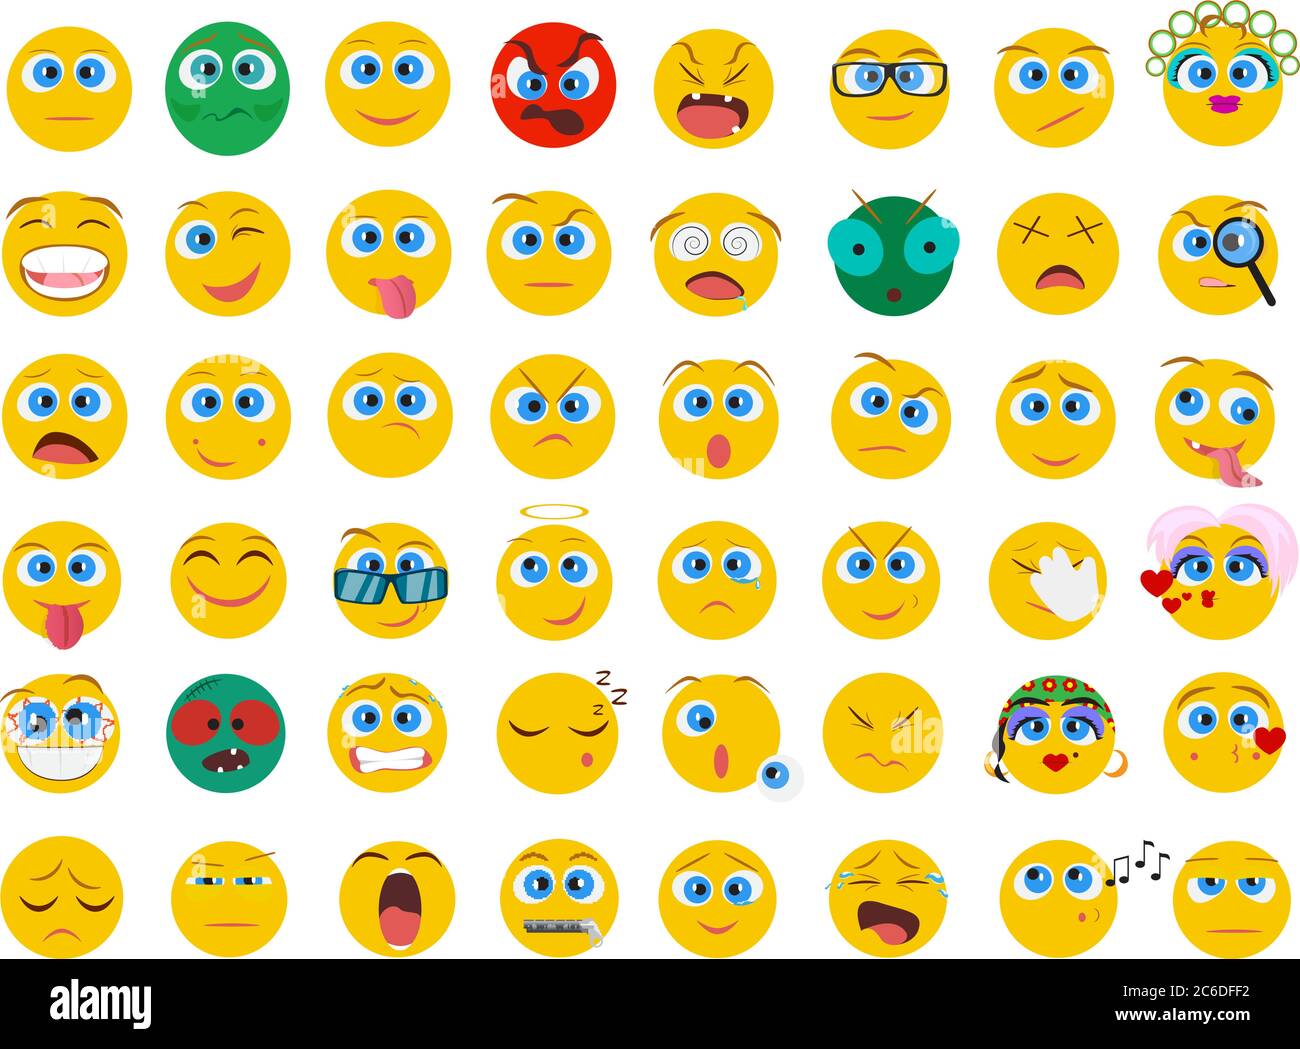 Mega big collection set of flat Emoji face emotion icons isolated Stock Vector